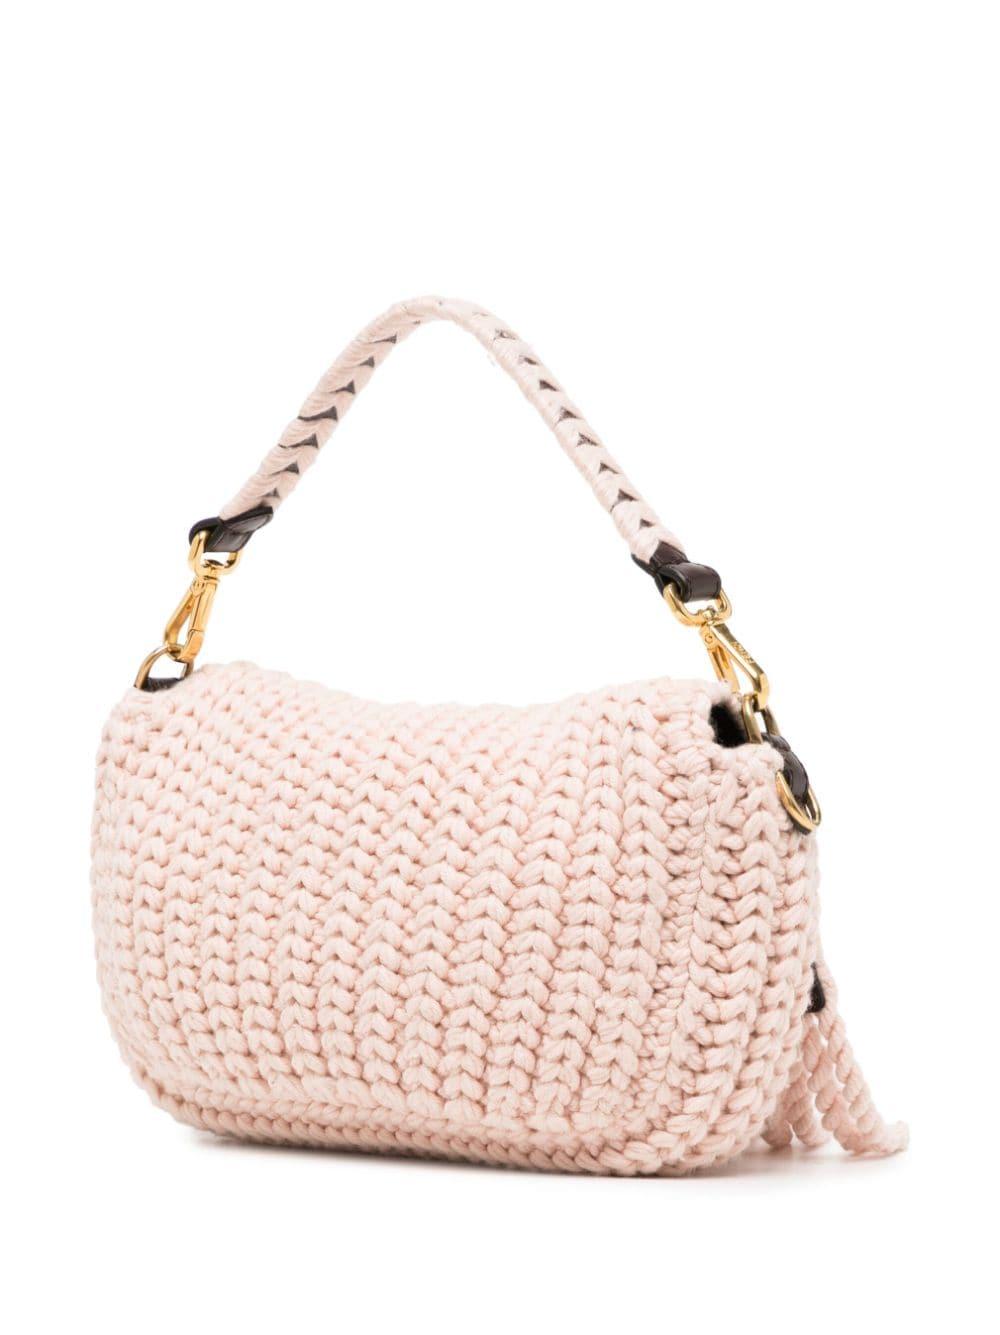 * Light pink
* Wool
* Crochet knit
* FF logo plaque
* Foldover top
* Single detachable top handle & shoulder strap
* Internal zip-fastening pocket
* Internal logo plaque
* Logo-print lining
* Gold-tone hardware
* Excellent Condition: comes with a